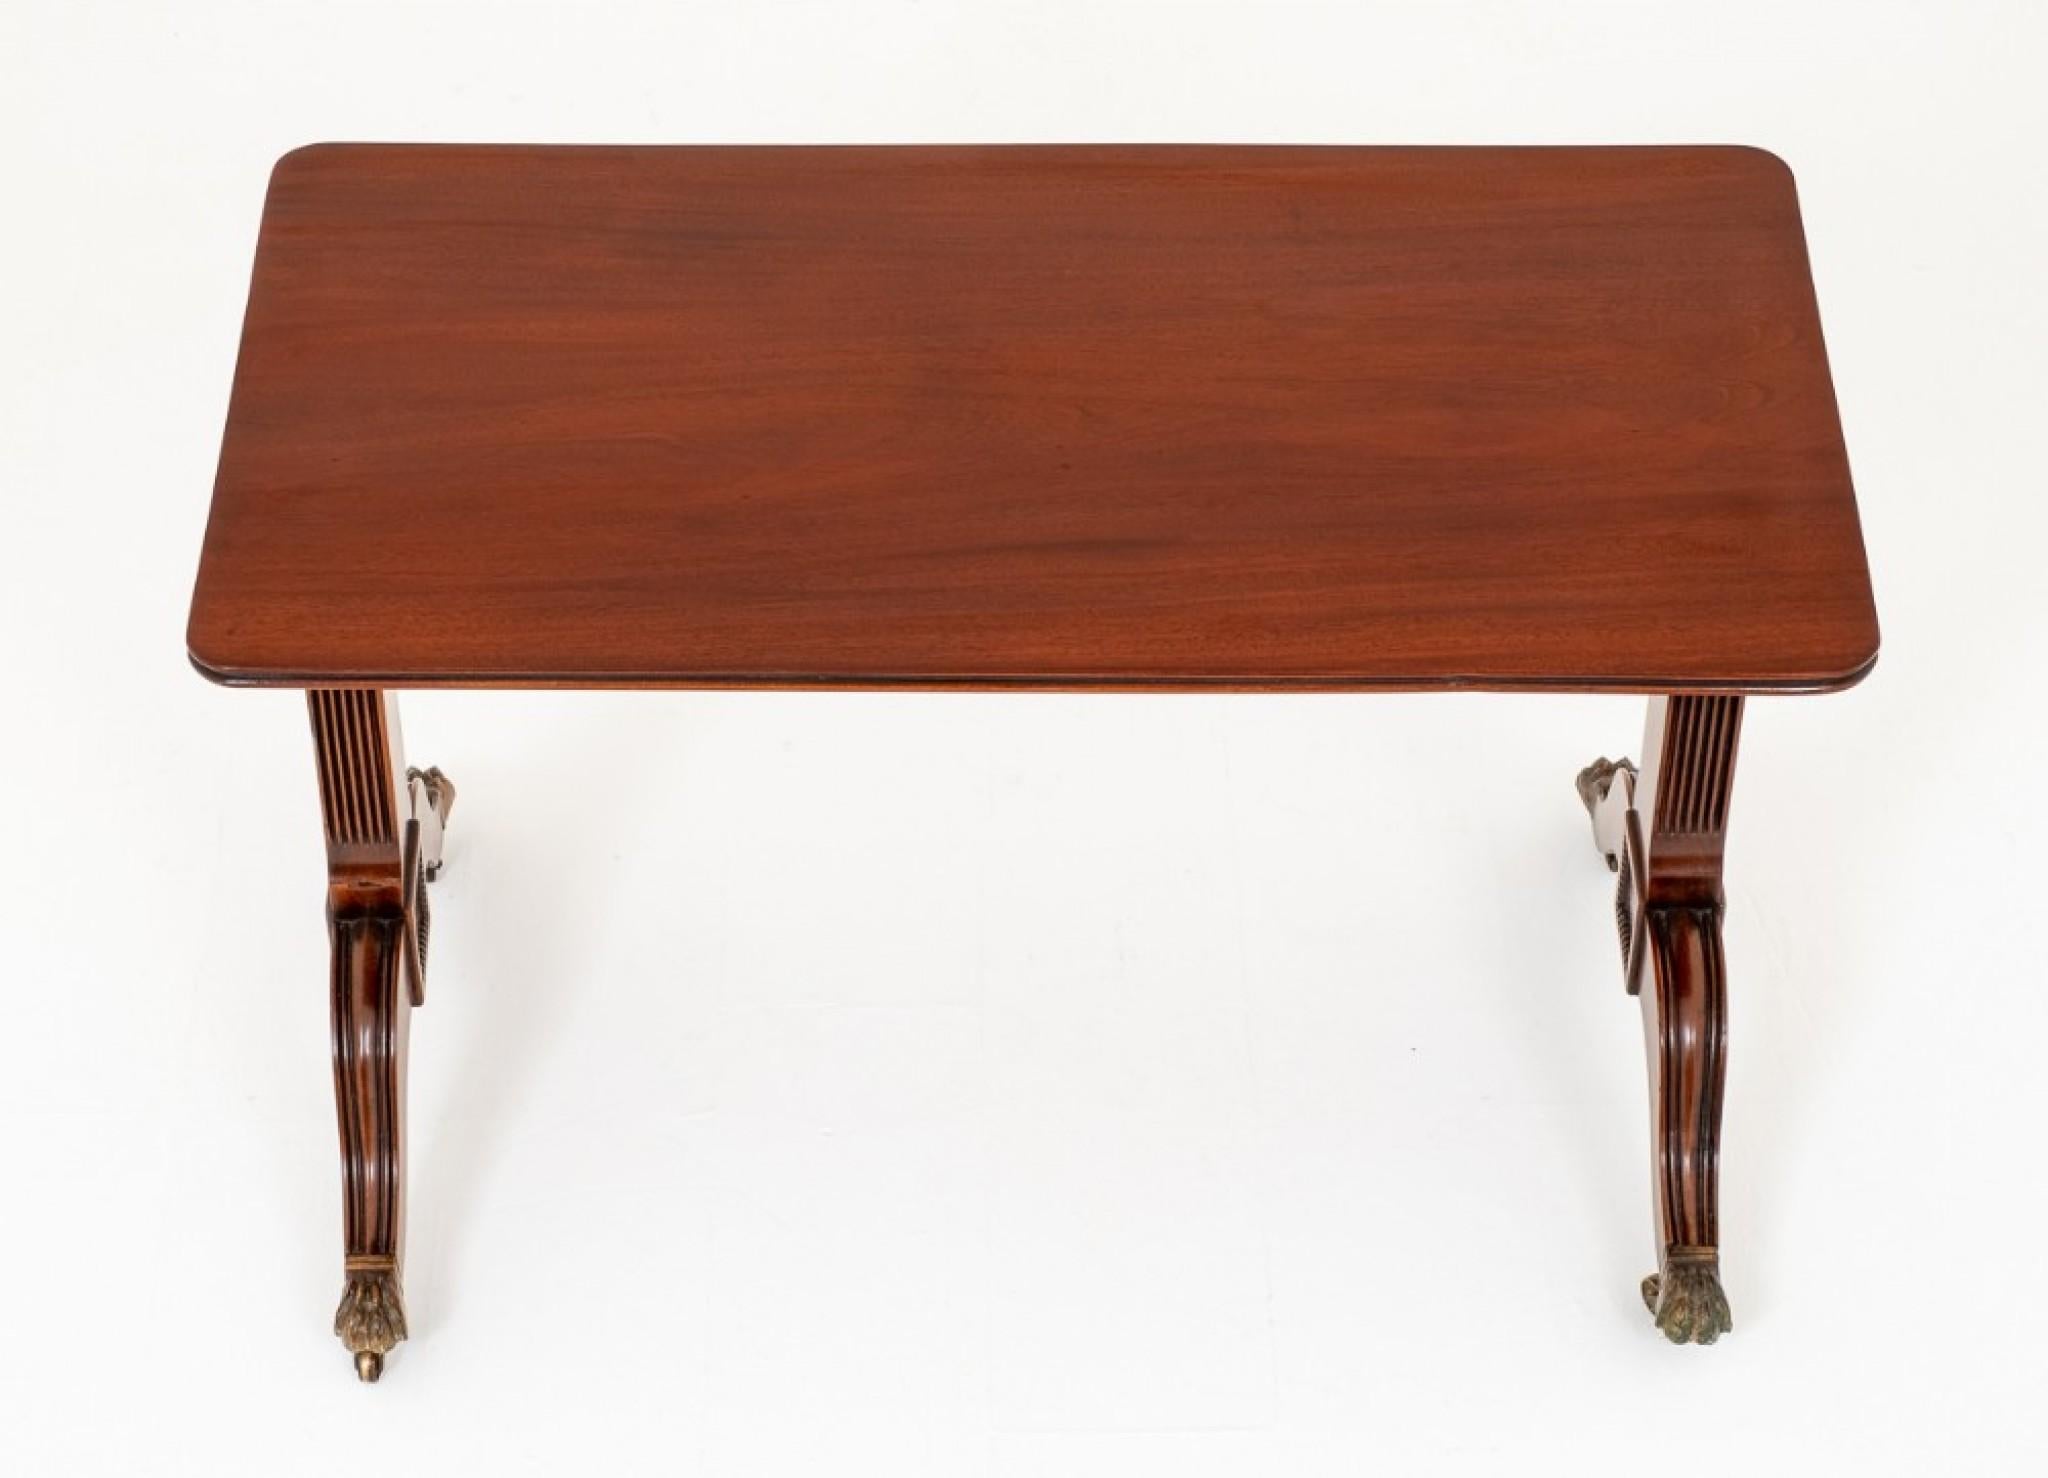 Regency Style Mahogany Coffee Table.
Raised upon swept legs with brass claw castors.
circa 1920
The uprights having fluted decoration.
The top being of a plain and simple form with double 